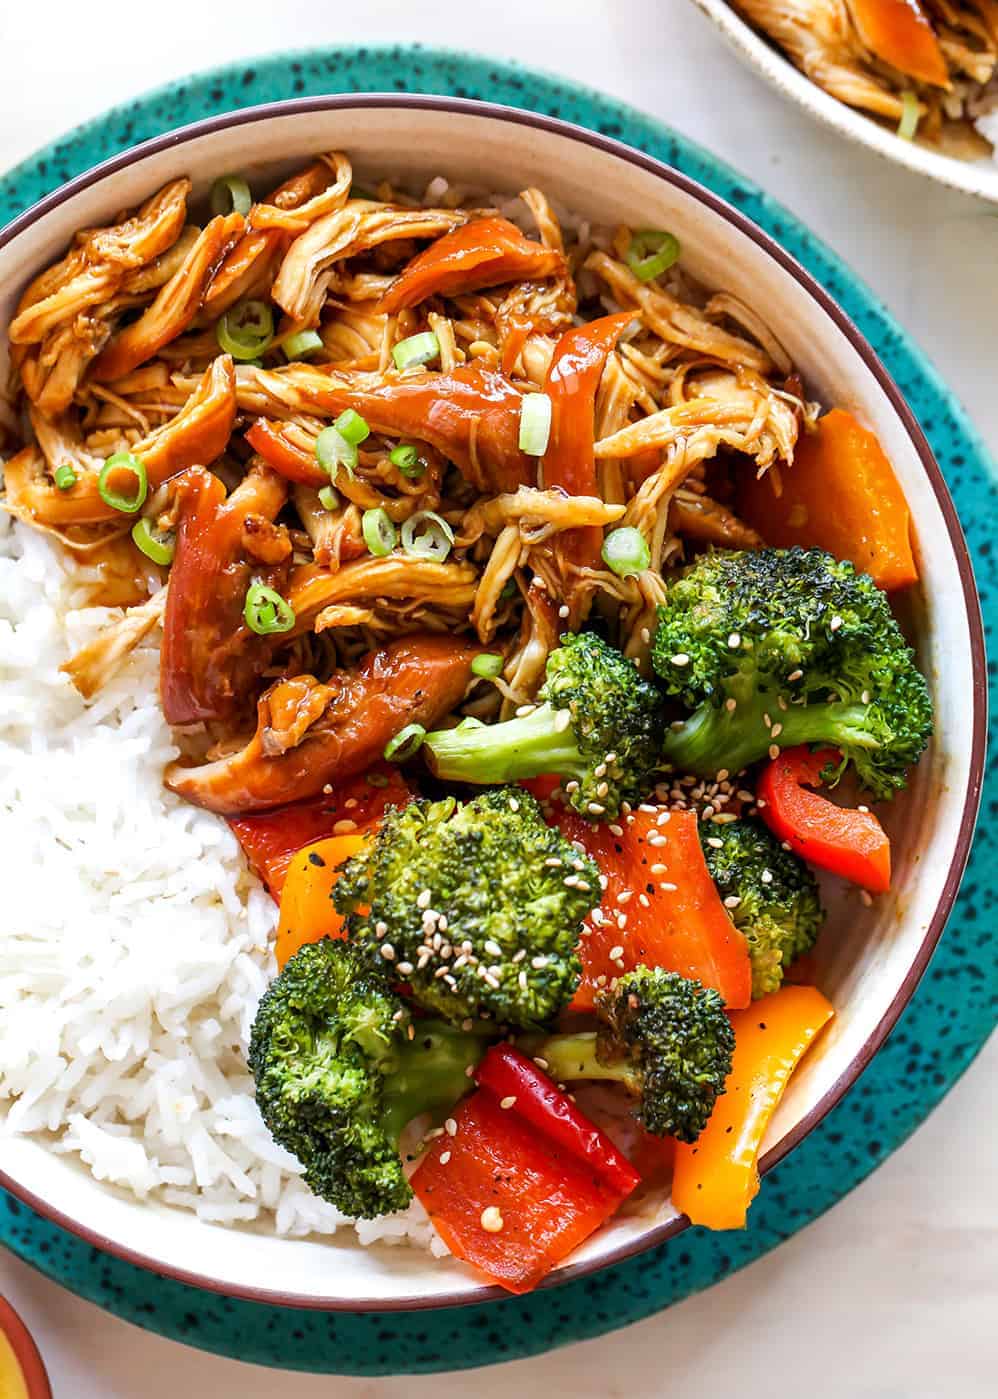 overhead view of a bowl of crockpot teriyaki chicken with veggies and rice / This Crockpot Teriyaki Chicken recipe is an easy recipe perfect for busy weeknights! It only takes 5 minutes to mix together, and then put it in the slow cooker to let it cook. Serve with stir-fried veggies and rice and you have a delicious and healthy meal the whole family will love!
